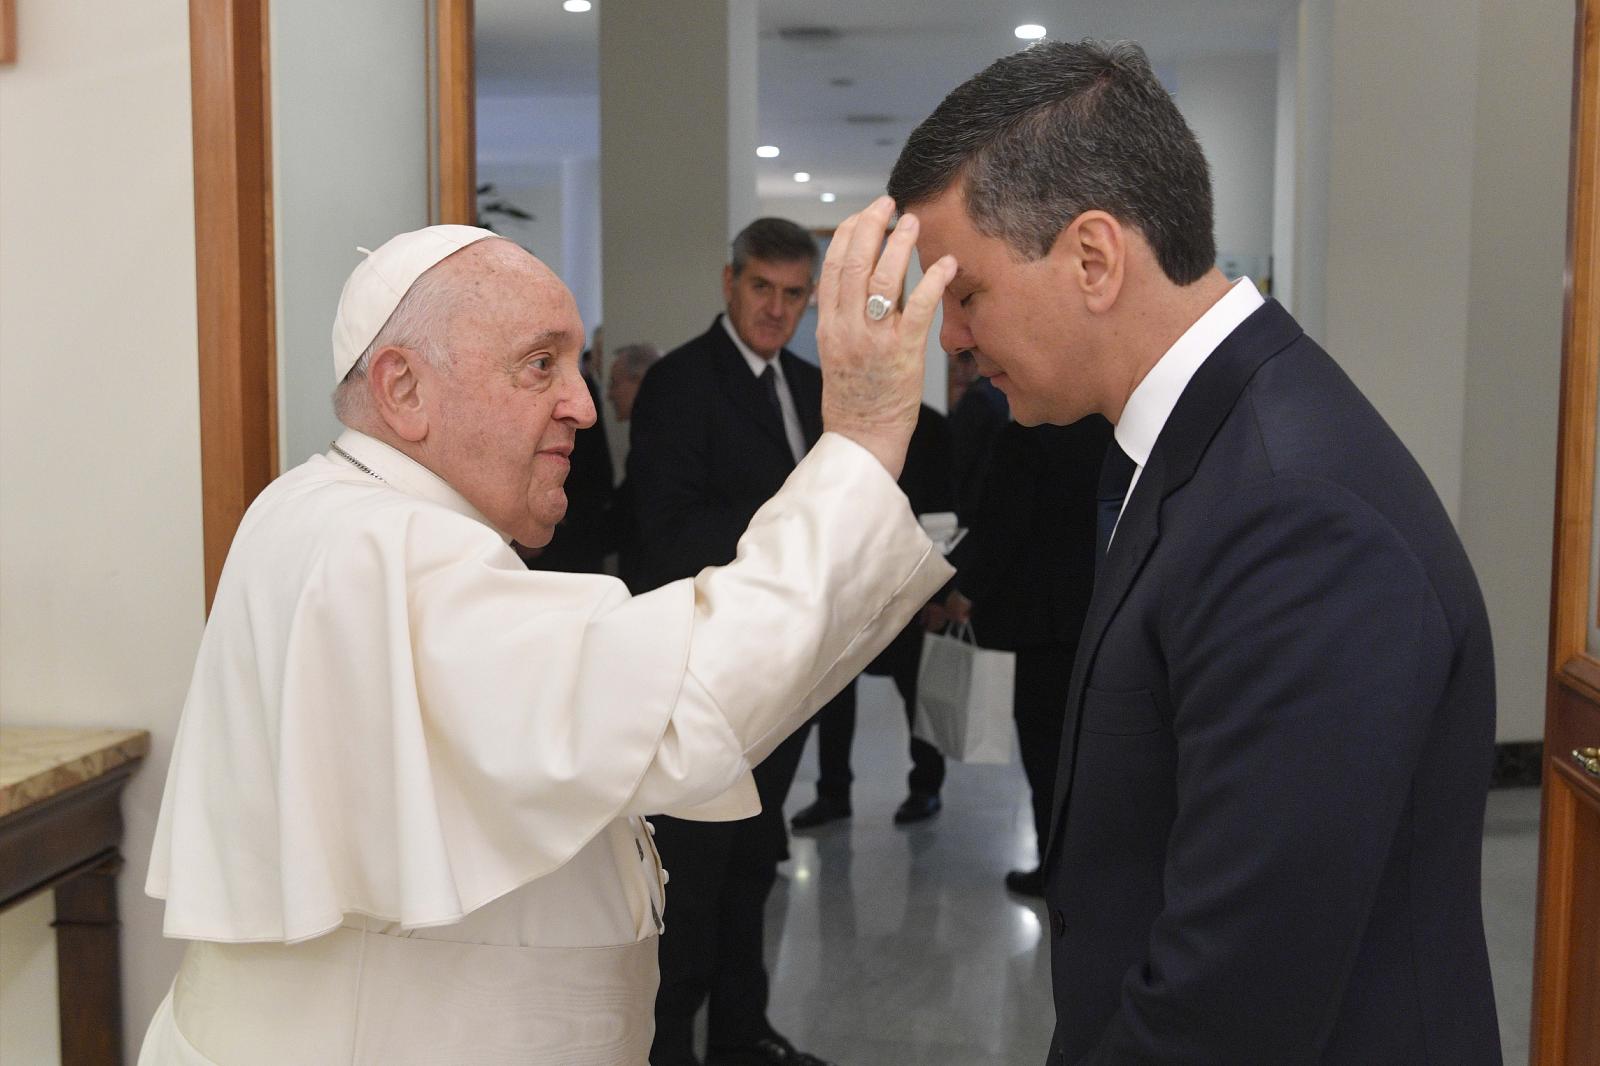 Pope Francis blesses Paraguayan president